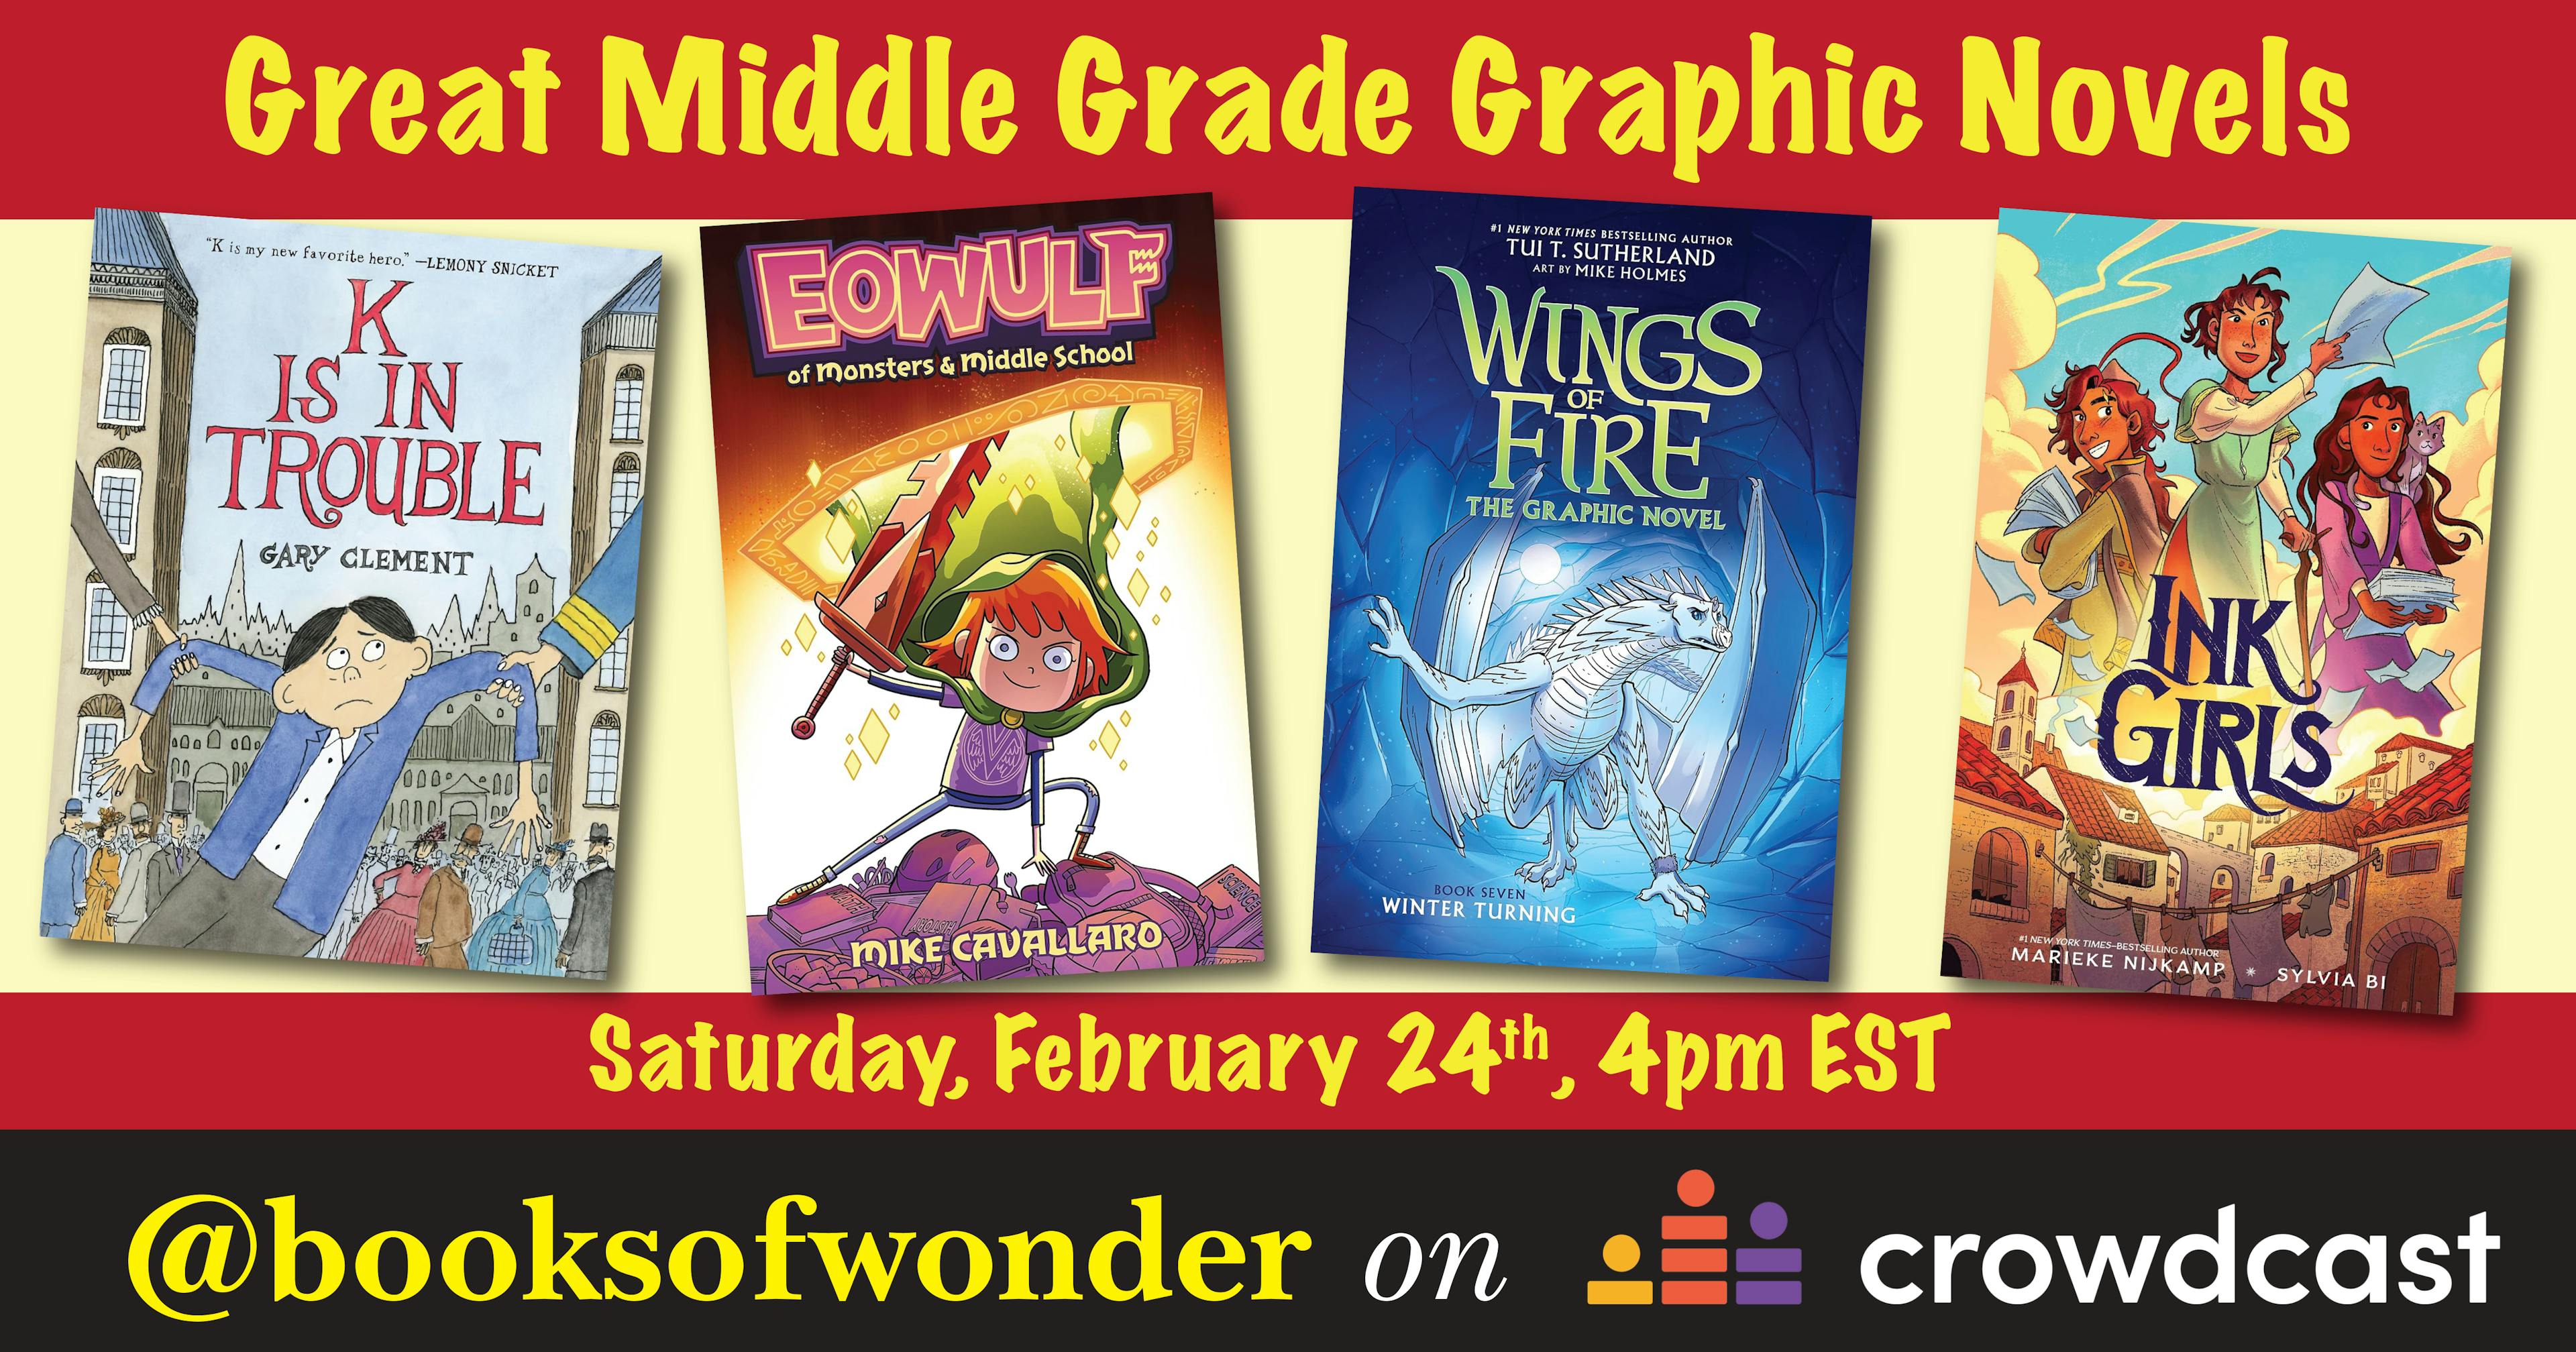 Great Middle Grade Graphic Novels event cover photo